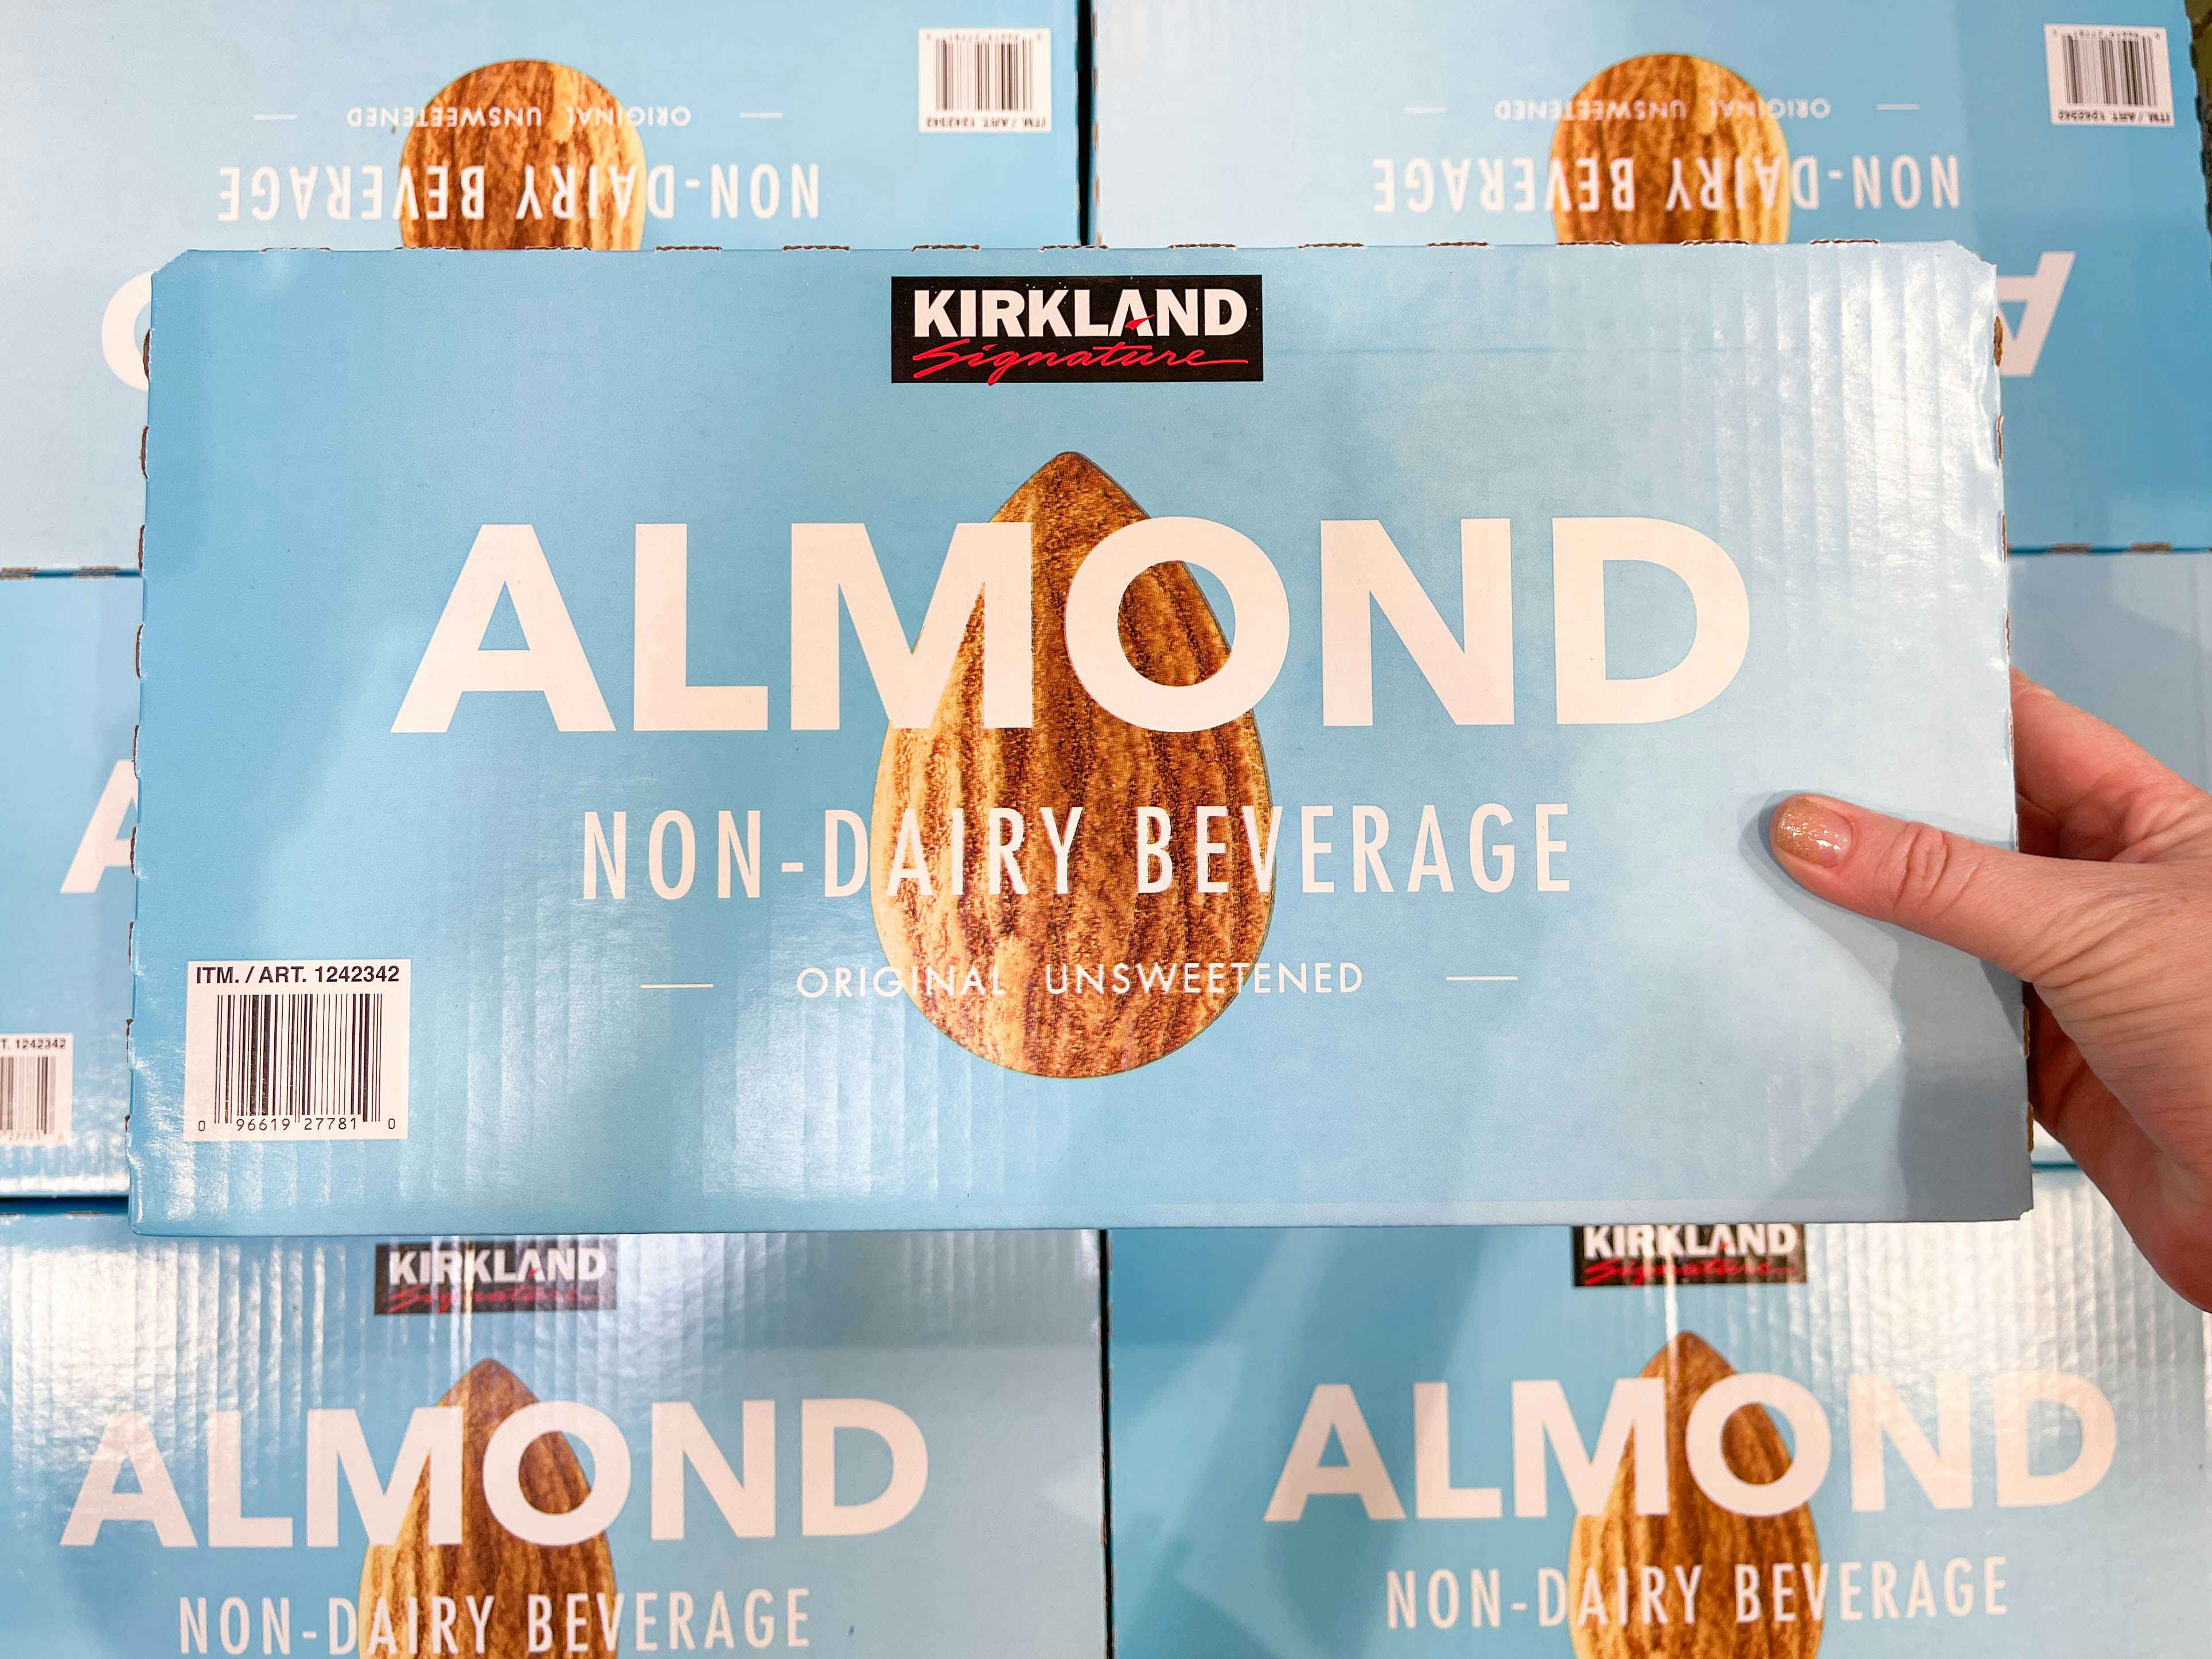 a box of almond milk being held in store